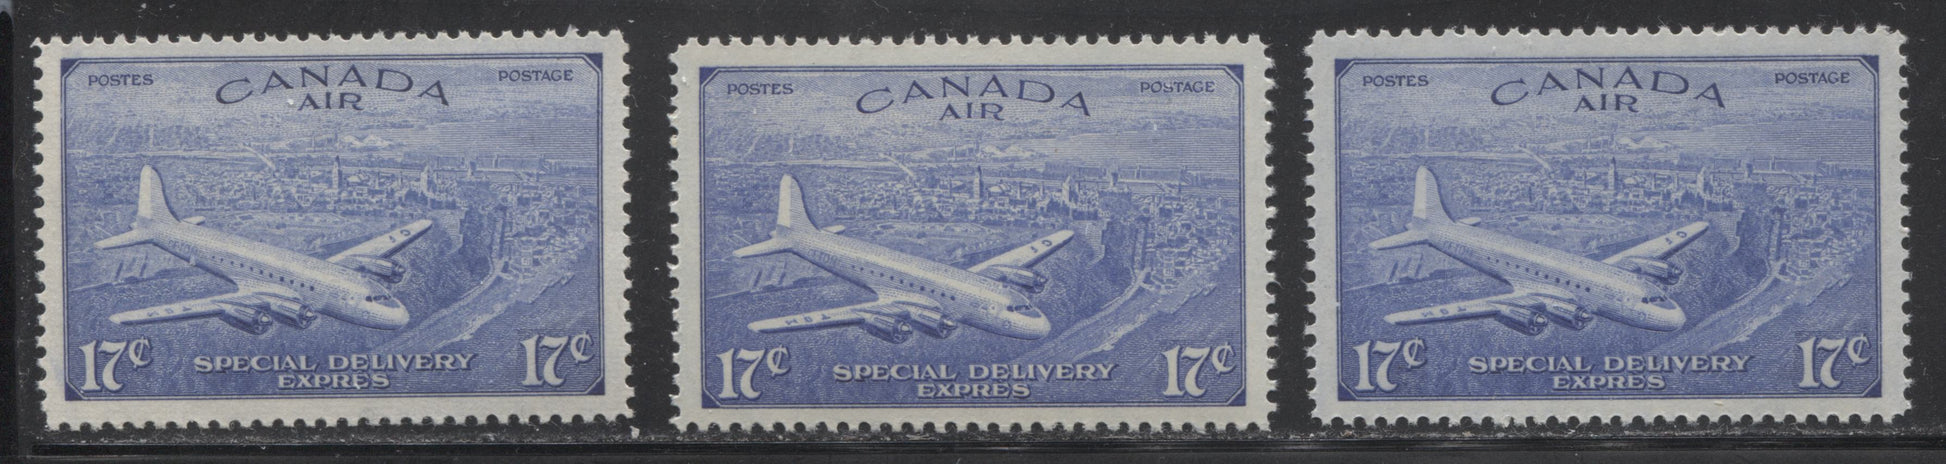 Canada #C9, CE3-4, E11 1946-1950 Peace Issue - Specialized Lot of 15 VF NH Airmail and Special Delivery Stamps Brixton Chrome 